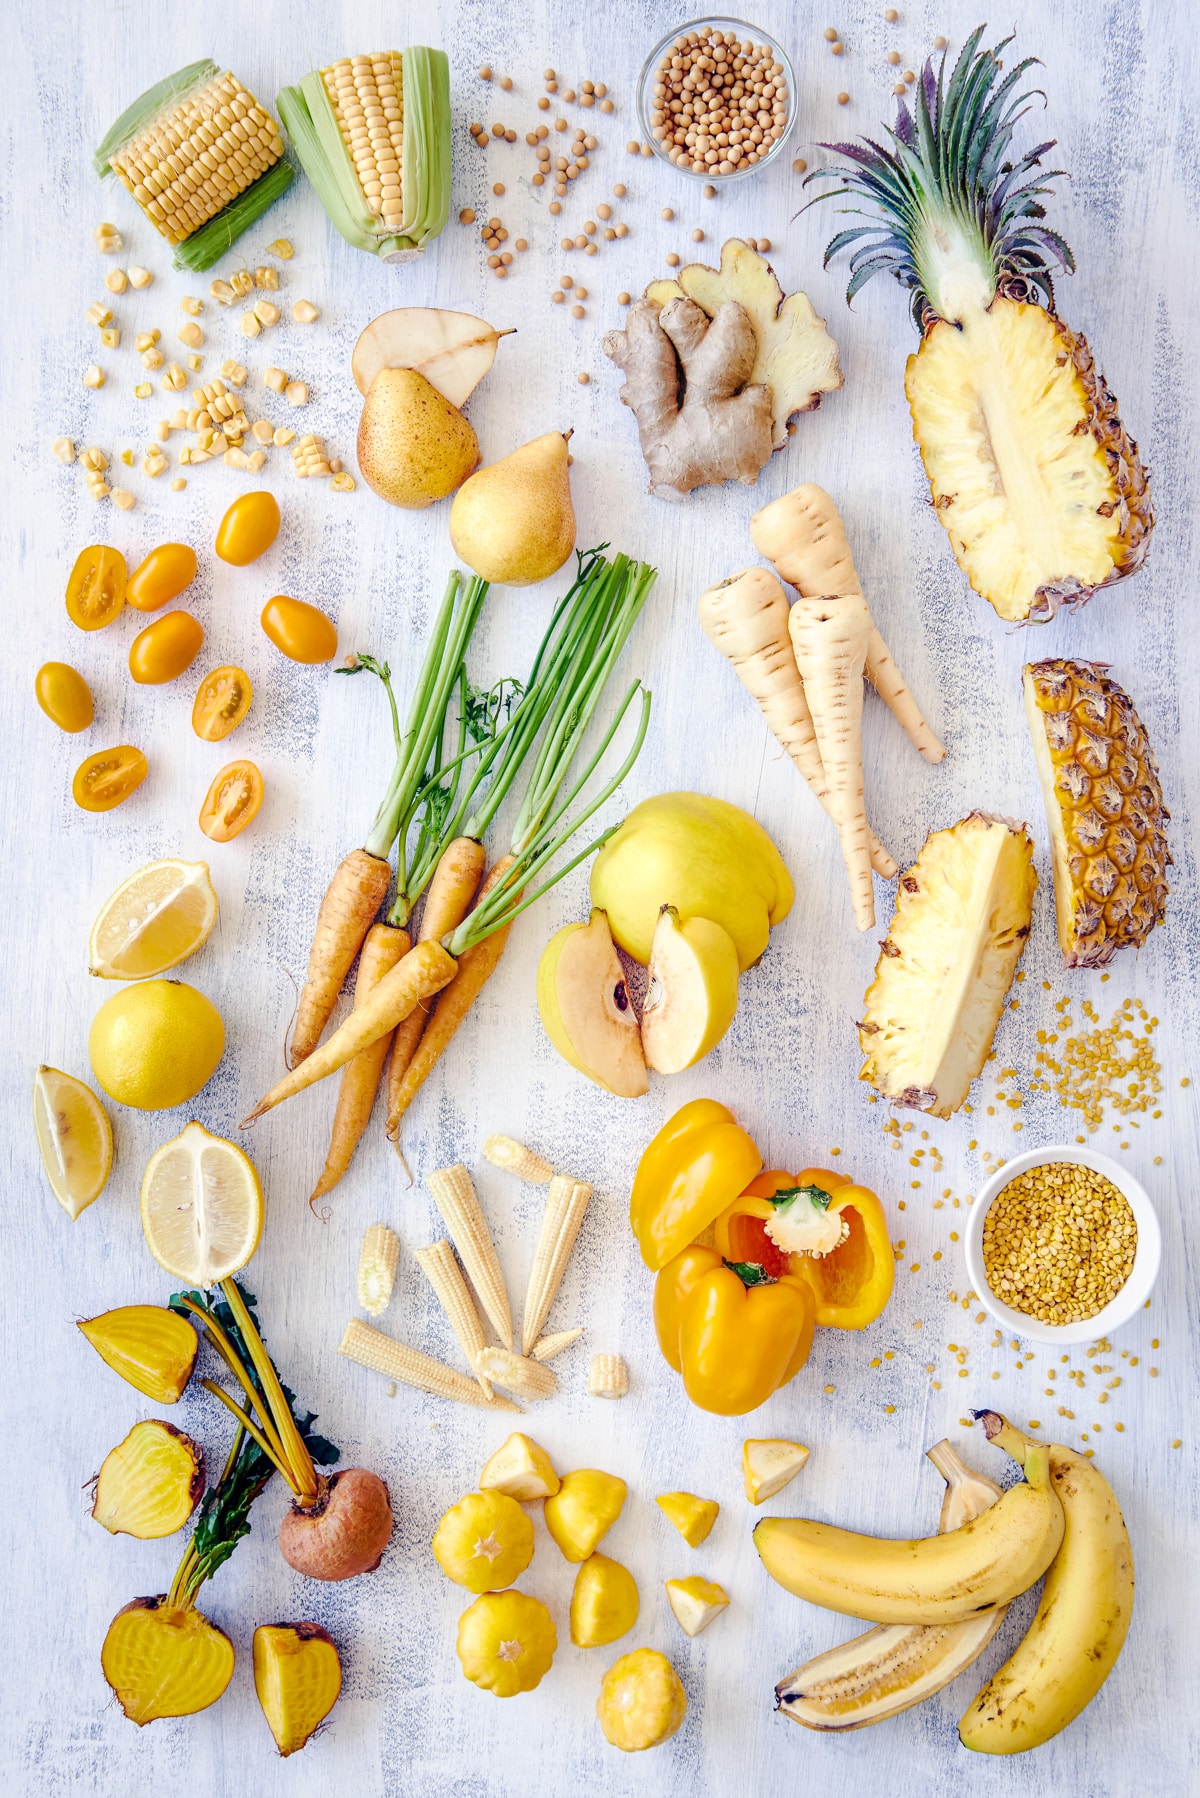 Many yellow fruits and veggies on a white surface.